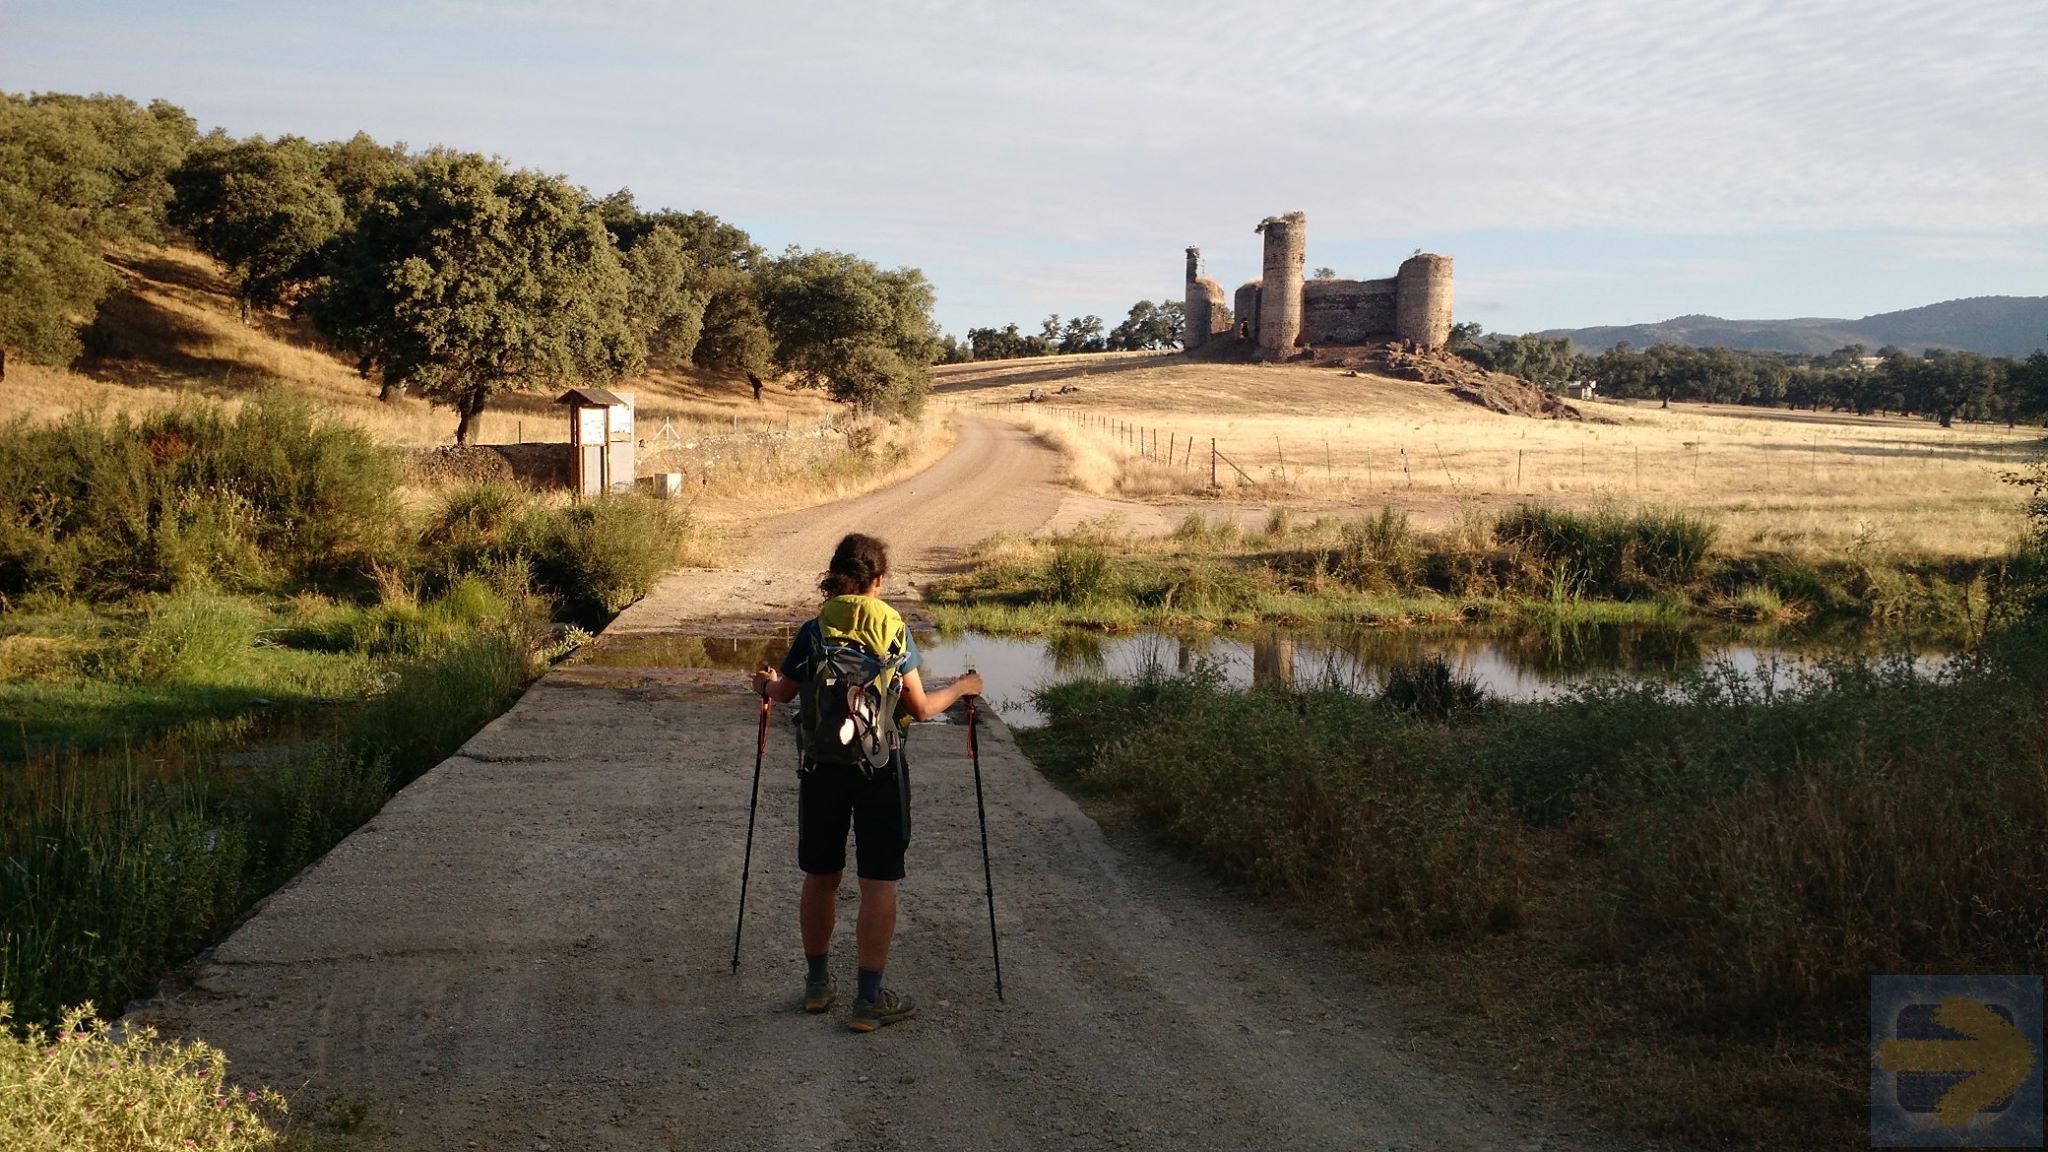 Crossing from Andalusia to Extremadura June 2015